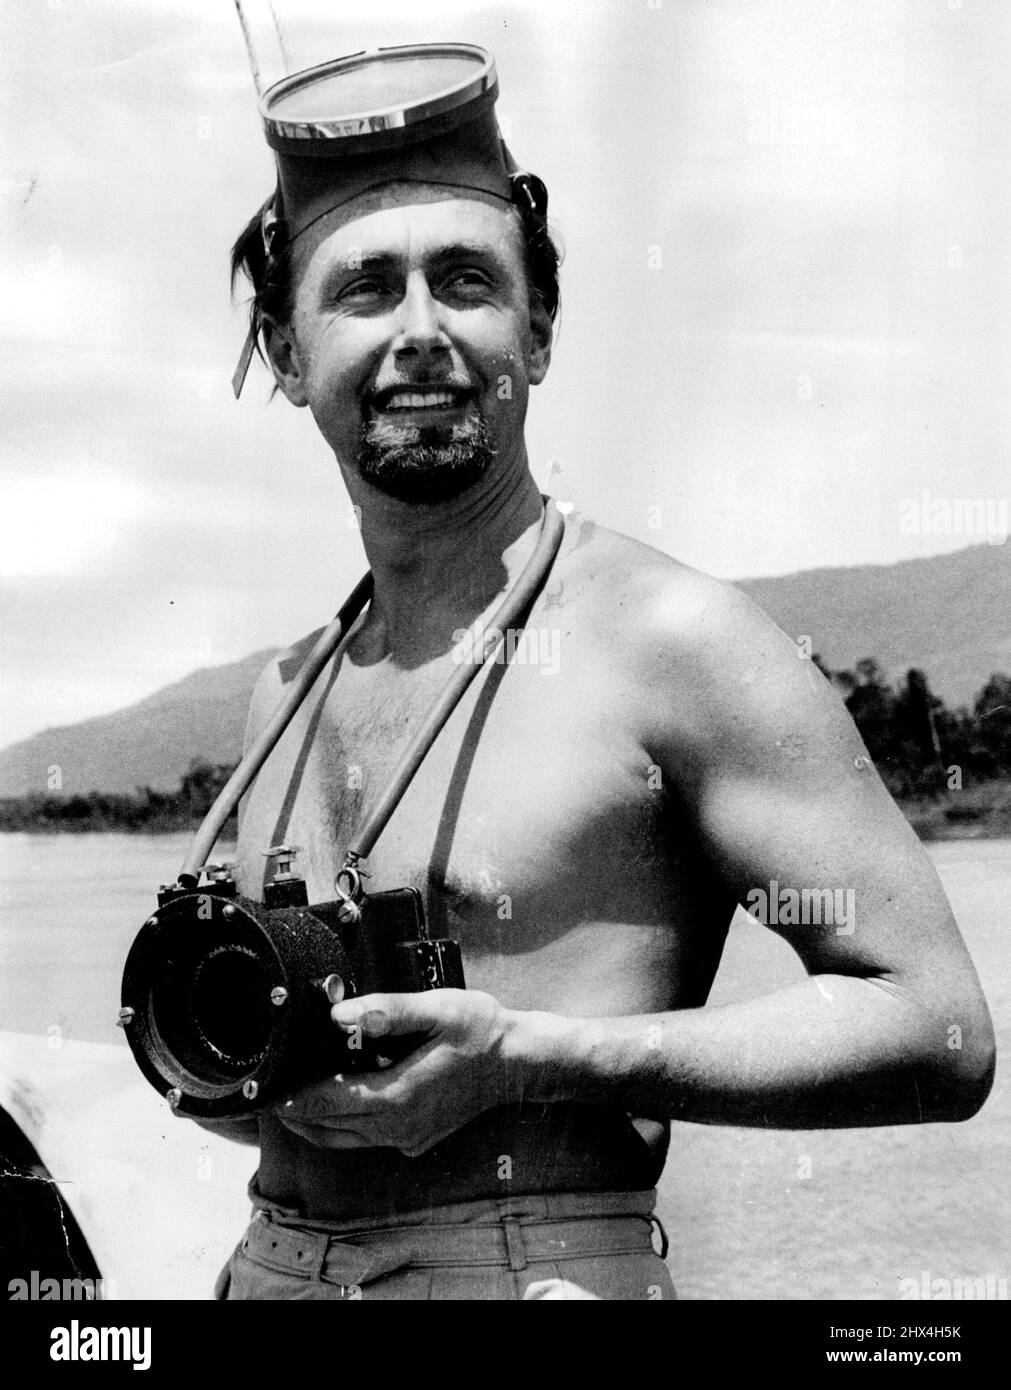 Doctor Hans Hass, Viennese underwater explorer photographed aboard the Cairns launch 'Possum' just before leaving for Ribbon Reef off Cooktown. The camera is a specially designed model for marine work and devised by himself. February 01, 1955. Stock Photo